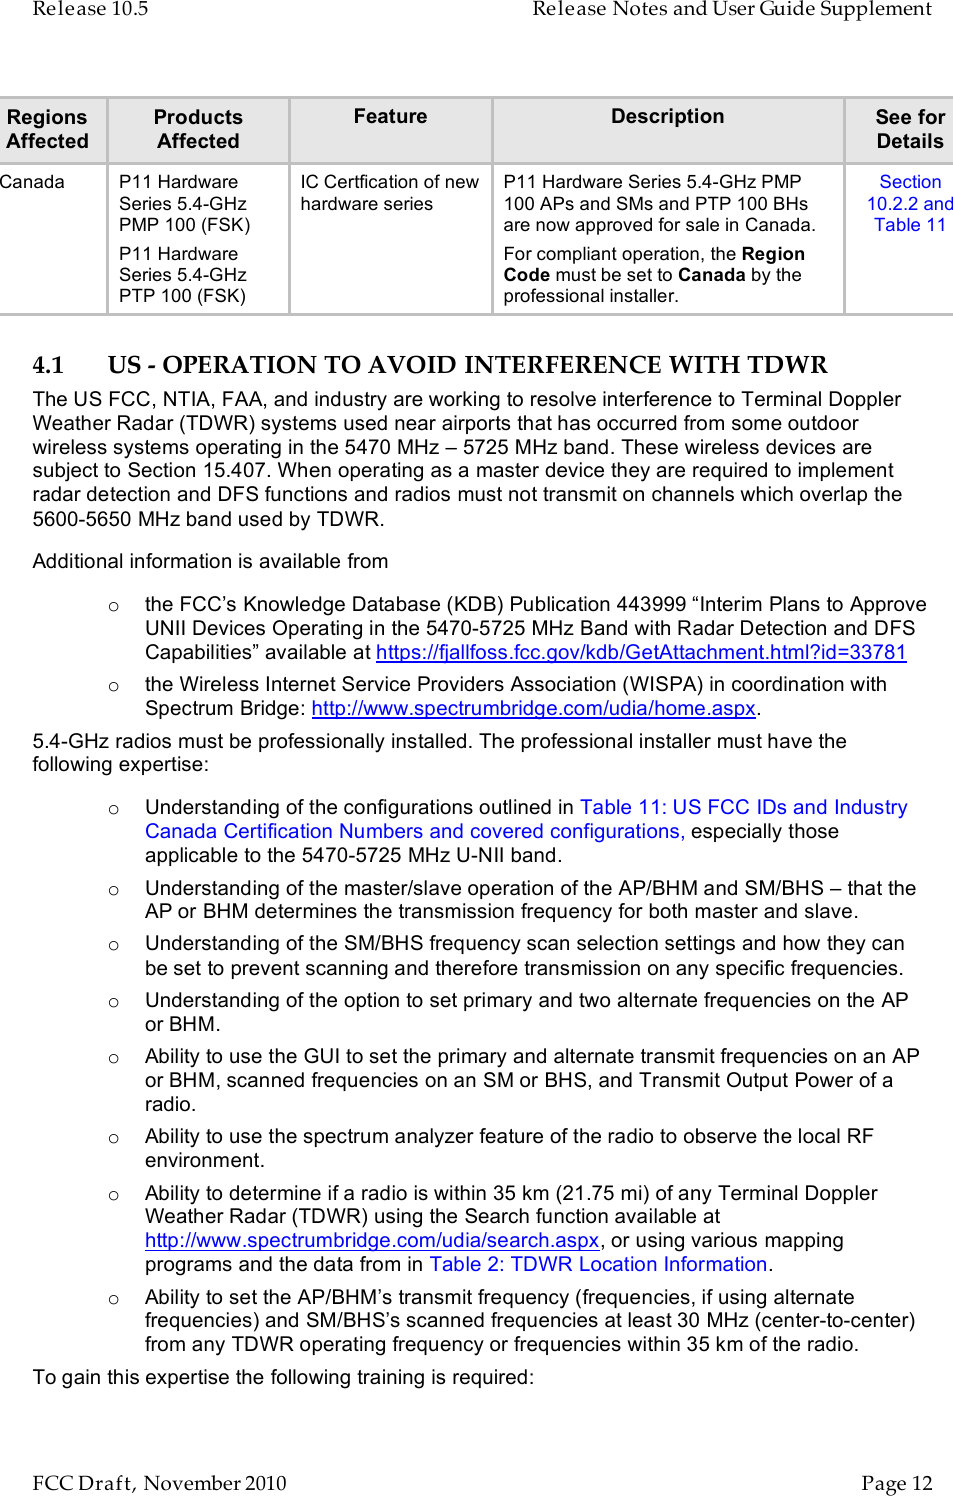 Release 10.5    Release Notes and User Guide Supplement      FCC Draft, November 2010  Page 12   Regions Affected Products Affected Feature Description See for Details Canada P11 Hardware Series 5.4-GHz PMP 100 (FSK) P11 Hardware Series 5.4-GHz PTP 100 (FSK) IC Certfication of new hardware series P11 Hardware Series 5.4-GHz PMP 100 APs and SMs and PTP 100 BHs are now approved for sale in Canada. For compliant operation, the Region Code must be set to Canada by the professional installer. Section 10.2.2 and Table 11 4.1 US - OPERATION TO AVOID INTERFERENCE WITH TDWR The US FCC, NTIA, FAA, and industry are working to resolve interference to Terminal Doppler Weather Radar (TDWR) systems used near airports that has occurred from some outdoor wireless systems operating in the 5470 MHz – 5725 MHz band. These wireless devices are subject to Section 15.407. When operating as a master device they are required to implement radar detection and DFS functions and radios must not transmit on channels which overlap the 5600-5650 MHz band used by TDWR. Additional information is available from o the FCC’s Knowledge Database (KDB) Publication 443999 “Interim Plans to Approve UNII Devices Operating in the 5470-5725 MHz Band with Radar Detection and DFS Capabilities” available at https://fjallfoss.fcc.gov/kdb/GetAttachment.html?id=33781 o the Wireless Internet Service Providers Association (WISPA) in coordination with Spectrum Bridge: http://www.spectrumbridge.com/udia/home.aspx. 5.4-GHz radios must be professionally installed. The professional installer must have the following expertise: o Understanding of the configurations outlined in Table 11: US FCC IDs and Industry Canada Certification Numbers and covered configurations, especially those applicable to the 5470-5725 MHz U-NII band. o Understanding of the master/slave operation of the AP/BHM and SM/BHS – that the AP or BHM determines the transmission frequency for both master and slave.  o Understanding of the SM/BHS frequency scan selection settings and how they can be set to prevent scanning and therefore transmission on any specific frequencies. o Understanding of the option to set primary and two alternate frequencies on the AP or BHM.  o Ability to use the GUI to set the primary and alternate transmit frequencies on an AP or BHM, scanned frequencies on an SM or BHS, and Transmit Output Power of a radio. o Ability to use the spectrum analyzer feature of the radio to observe the local RF environment. o Ability to determine if a radio is within 35 km (21.75 mi) of any Terminal Doppler Weather Radar (TDWR) using the Search function available at http://www.spectrumbridge.com/udia/search.aspx, or using various mapping programs and the data from in Table 2: TDWR Location Information. o Ability to set the AP/BHM’s transmit frequency (frequencies, if using alternate frequencies) and SM/BHS’s scanned frequencies at least 30 MHz (center-to-center) from any TDWR operating frequency or frequencies within 35 km of the radio. To gain this expertise the following training is required: 